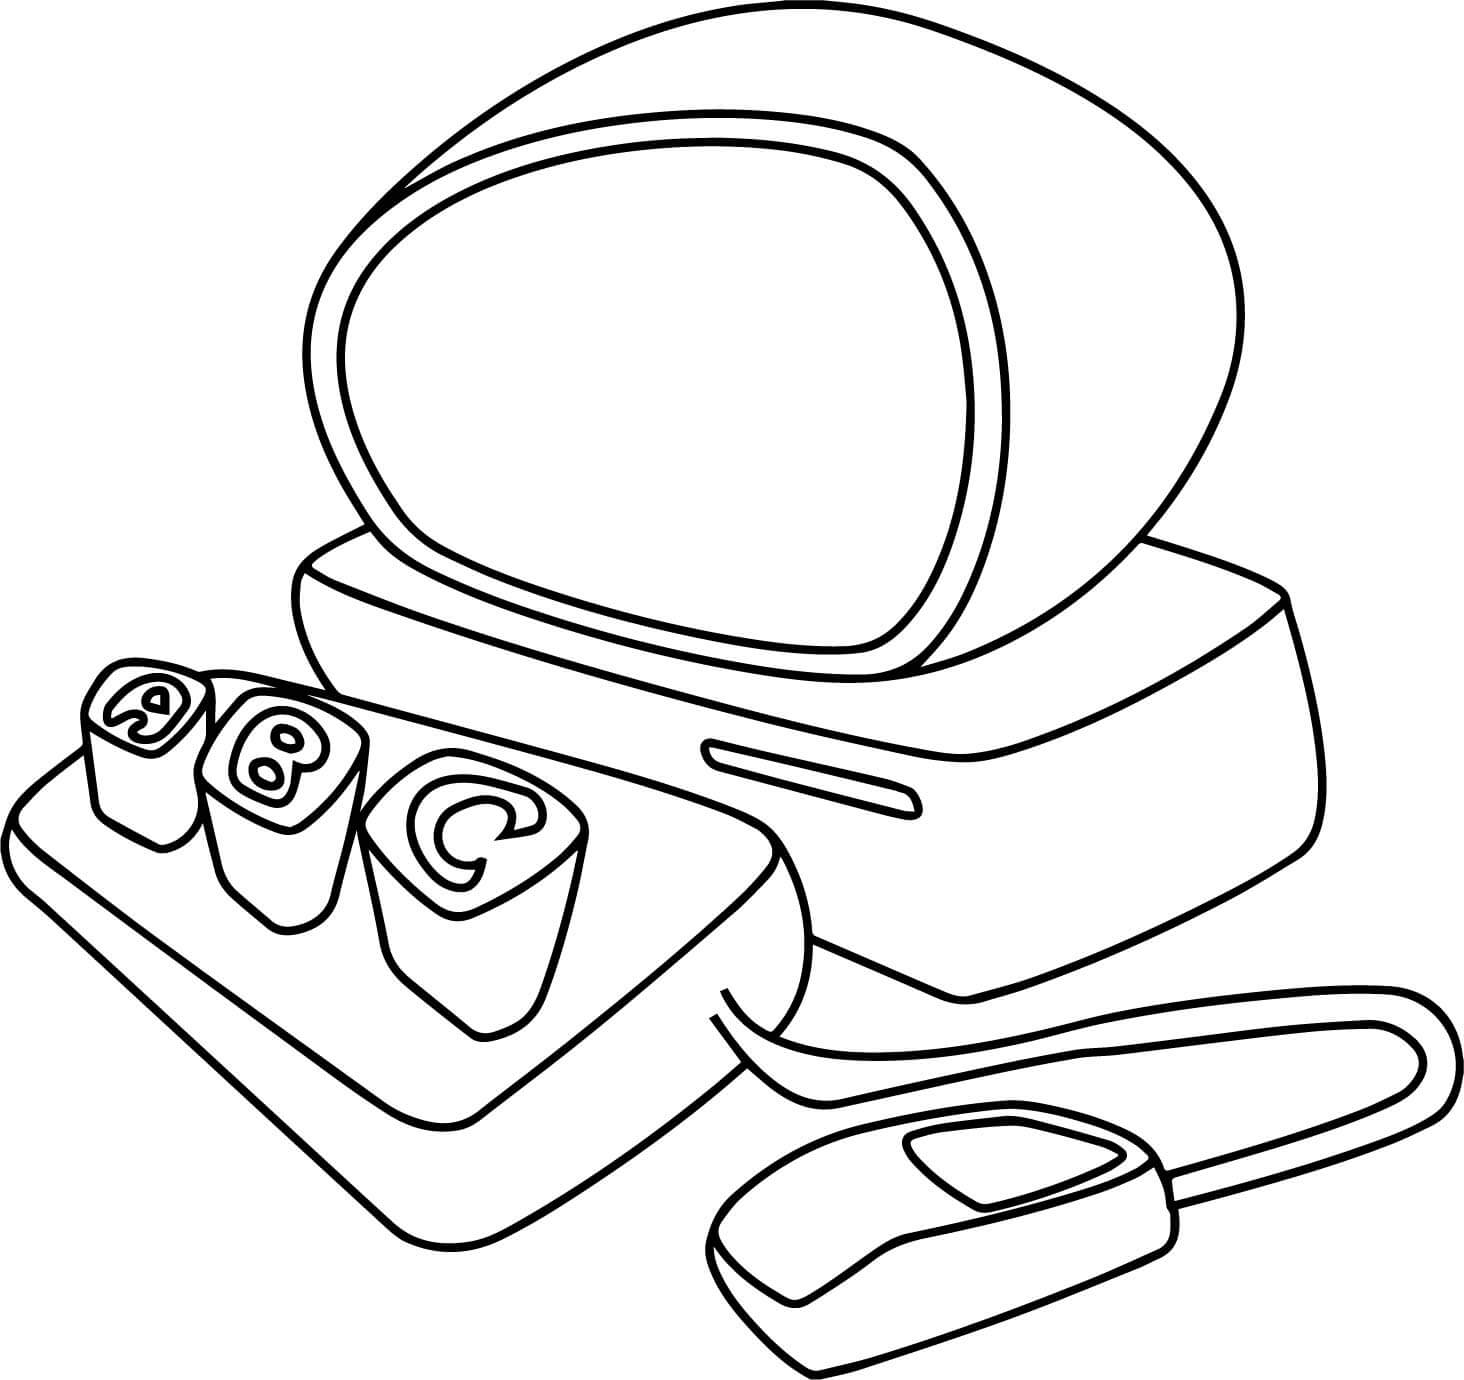 Fun Computer Coloring Page for Kids